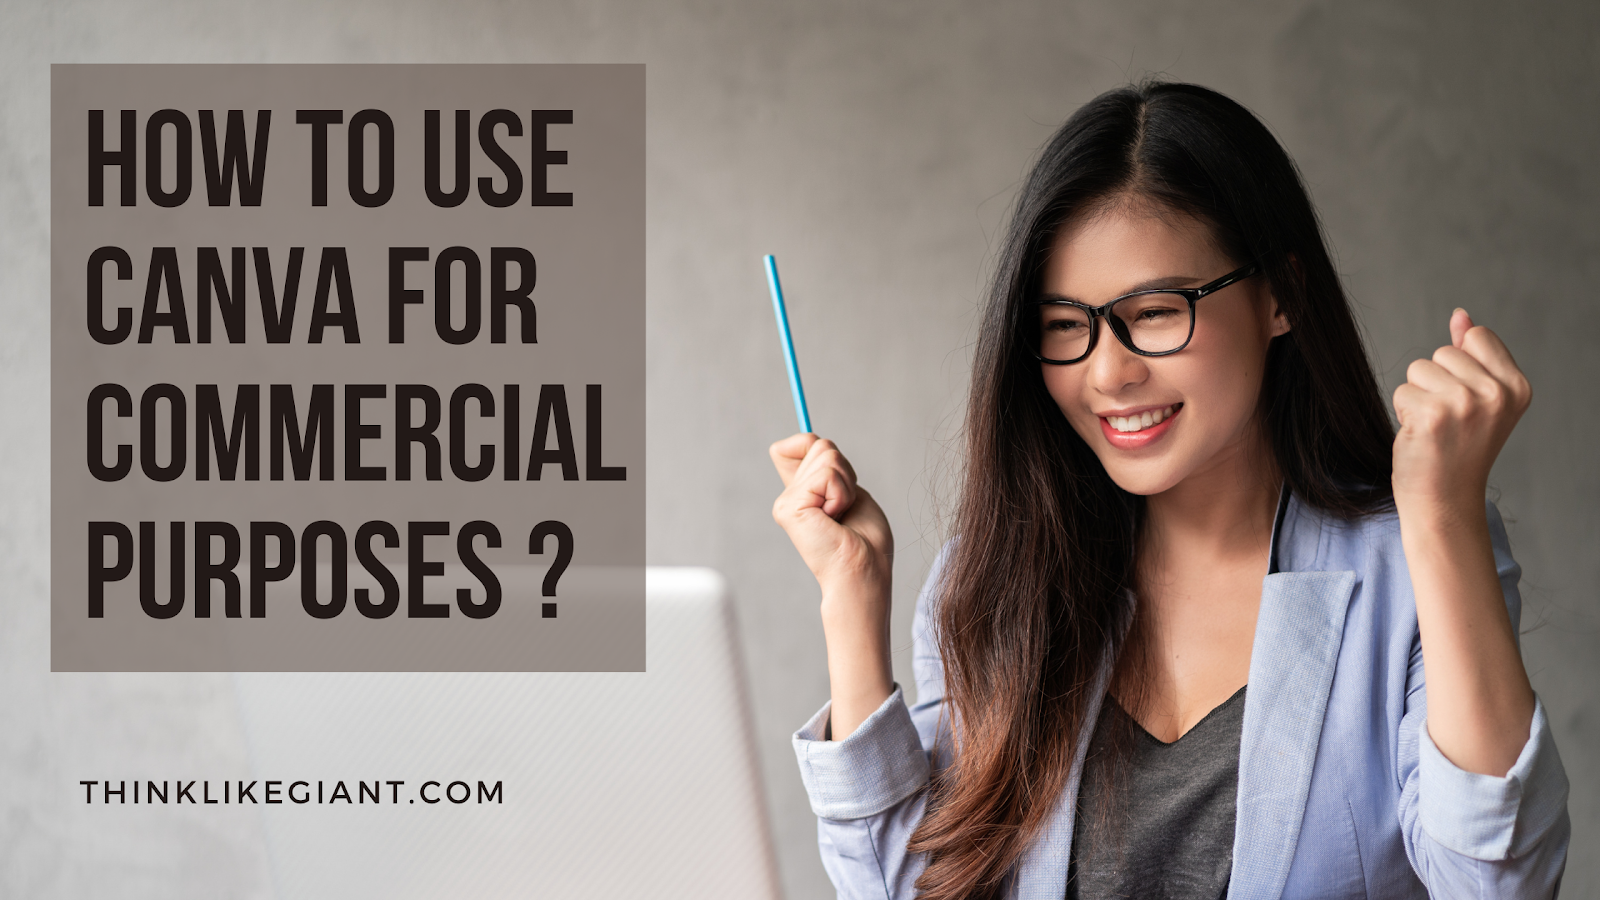 How to use canva for commercial purposes